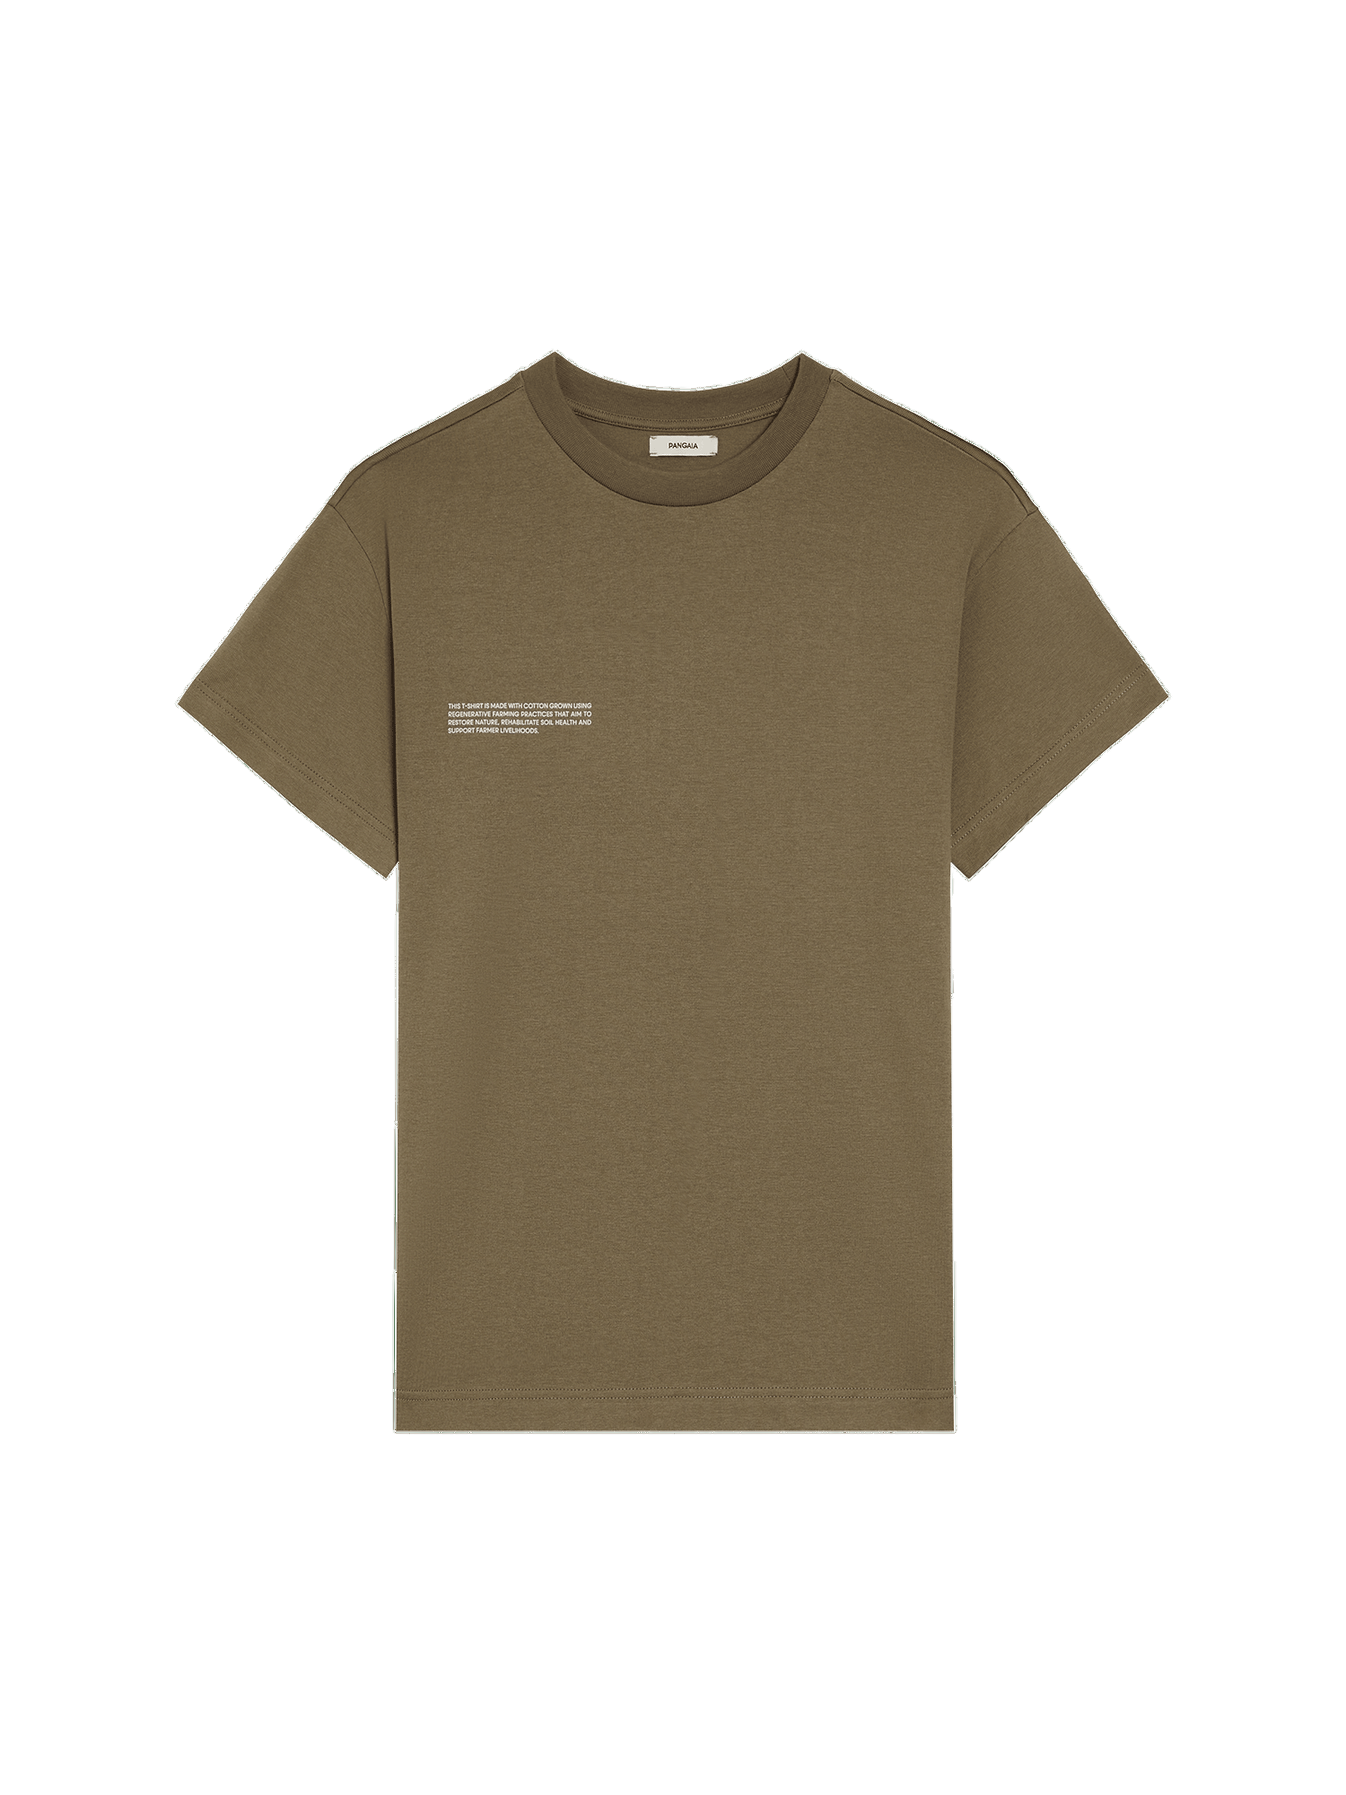 https://storage.googleapis.com/download/storage/v1/b/whering.appspot.com/o/marketplace_product_images%2Fpangaia-in-conversion-cotton-365-tshirt-khaki-gGJgjyj7uyiCRJn4URQY5M.png?generation=1691681887623774&alt=media